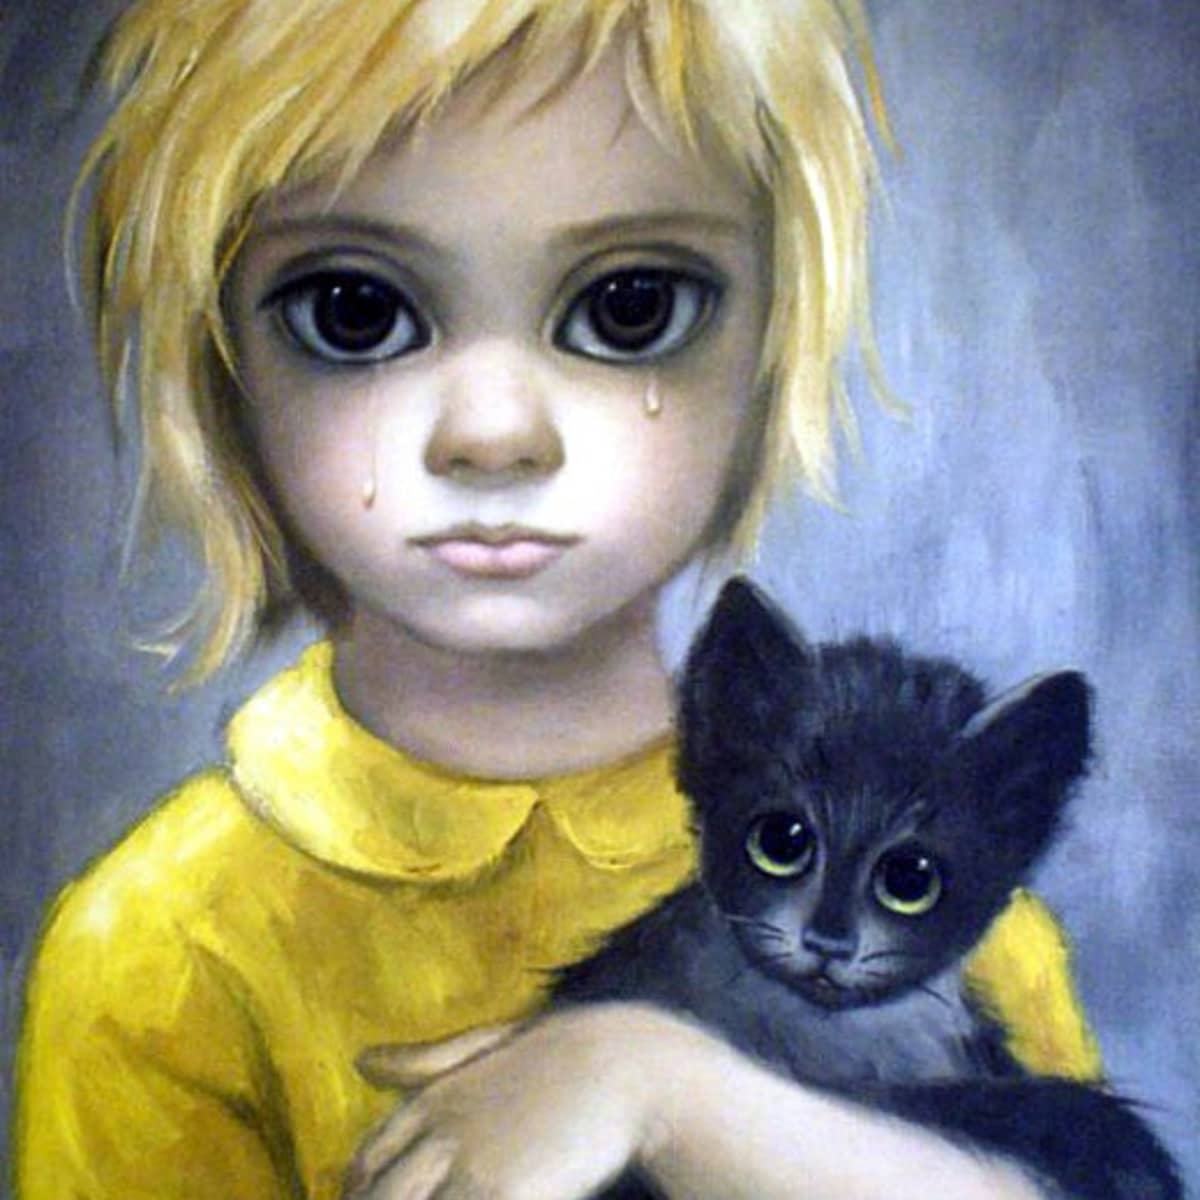 The big-eyed children: the extraordinary story of an epic art fraud, Painting